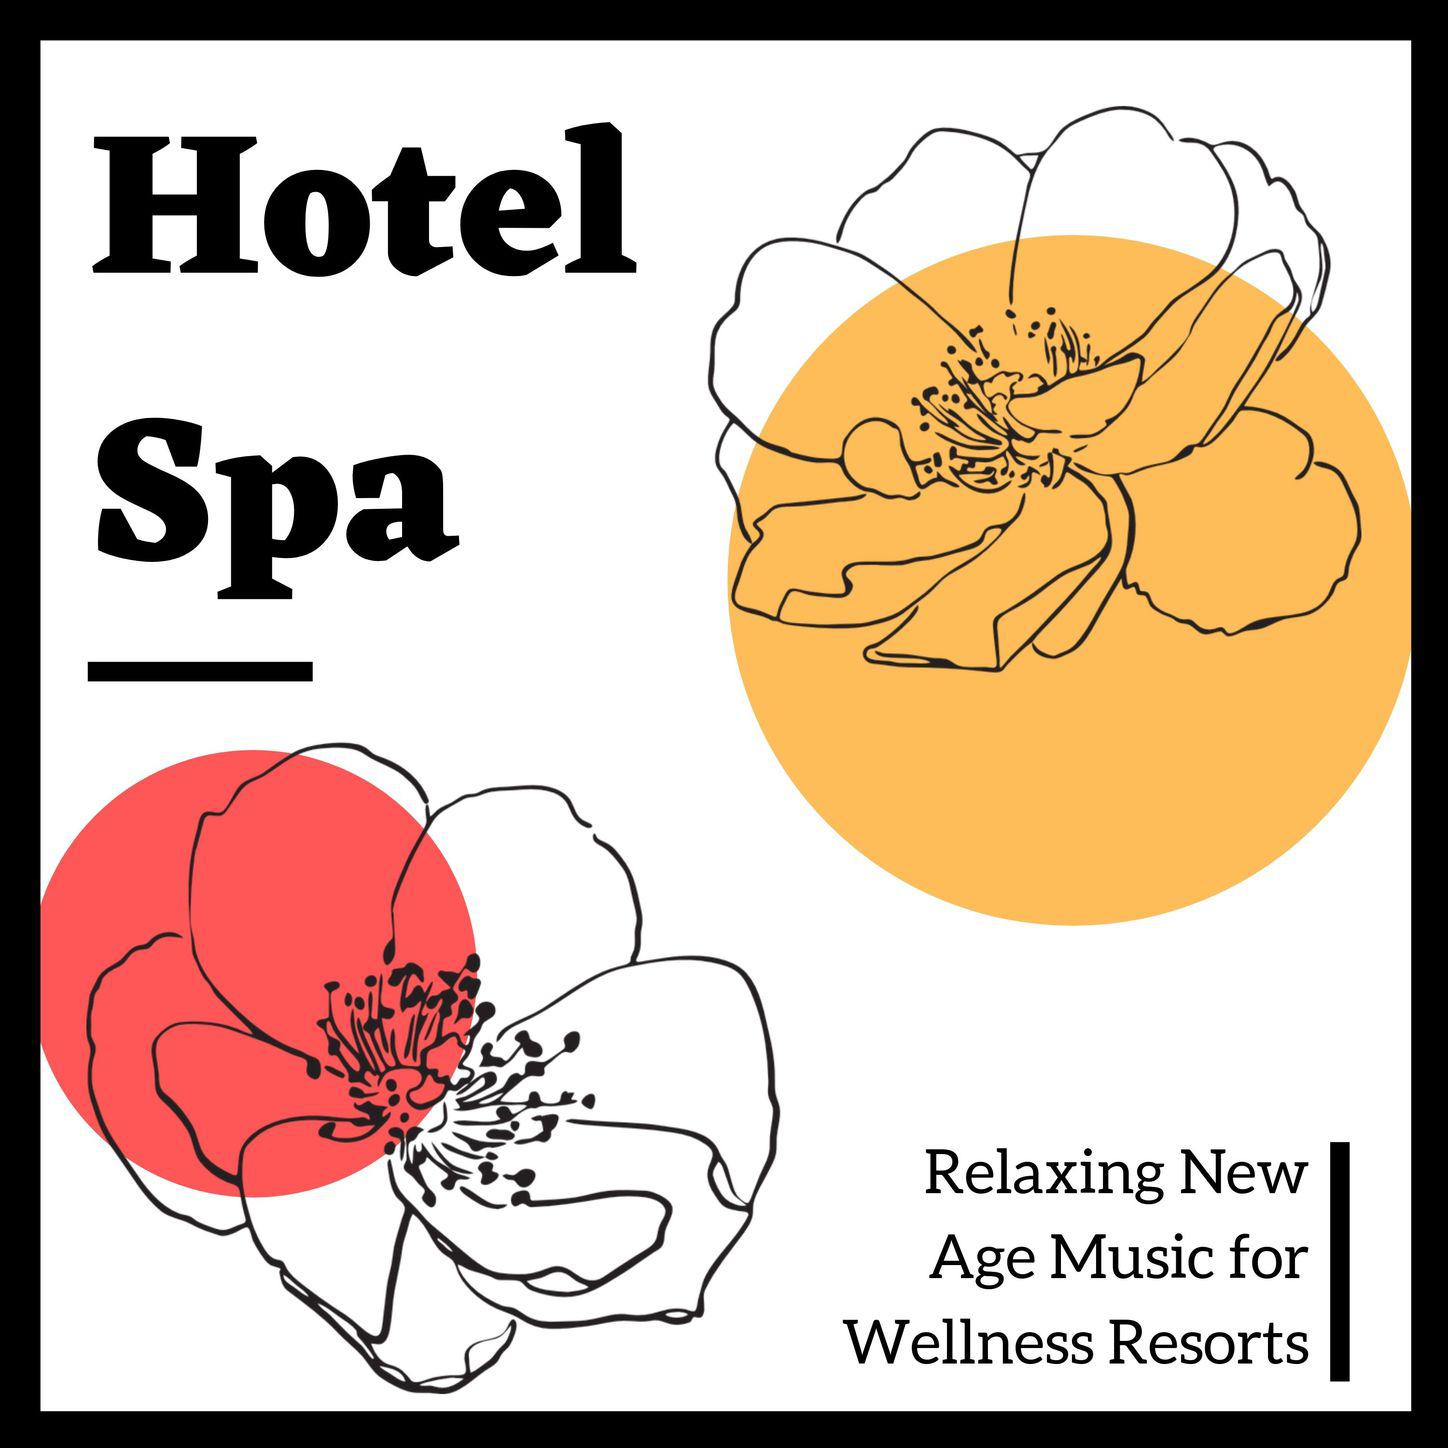 Hotel Spa - Relaxing New Age Music for Wellness Resorts